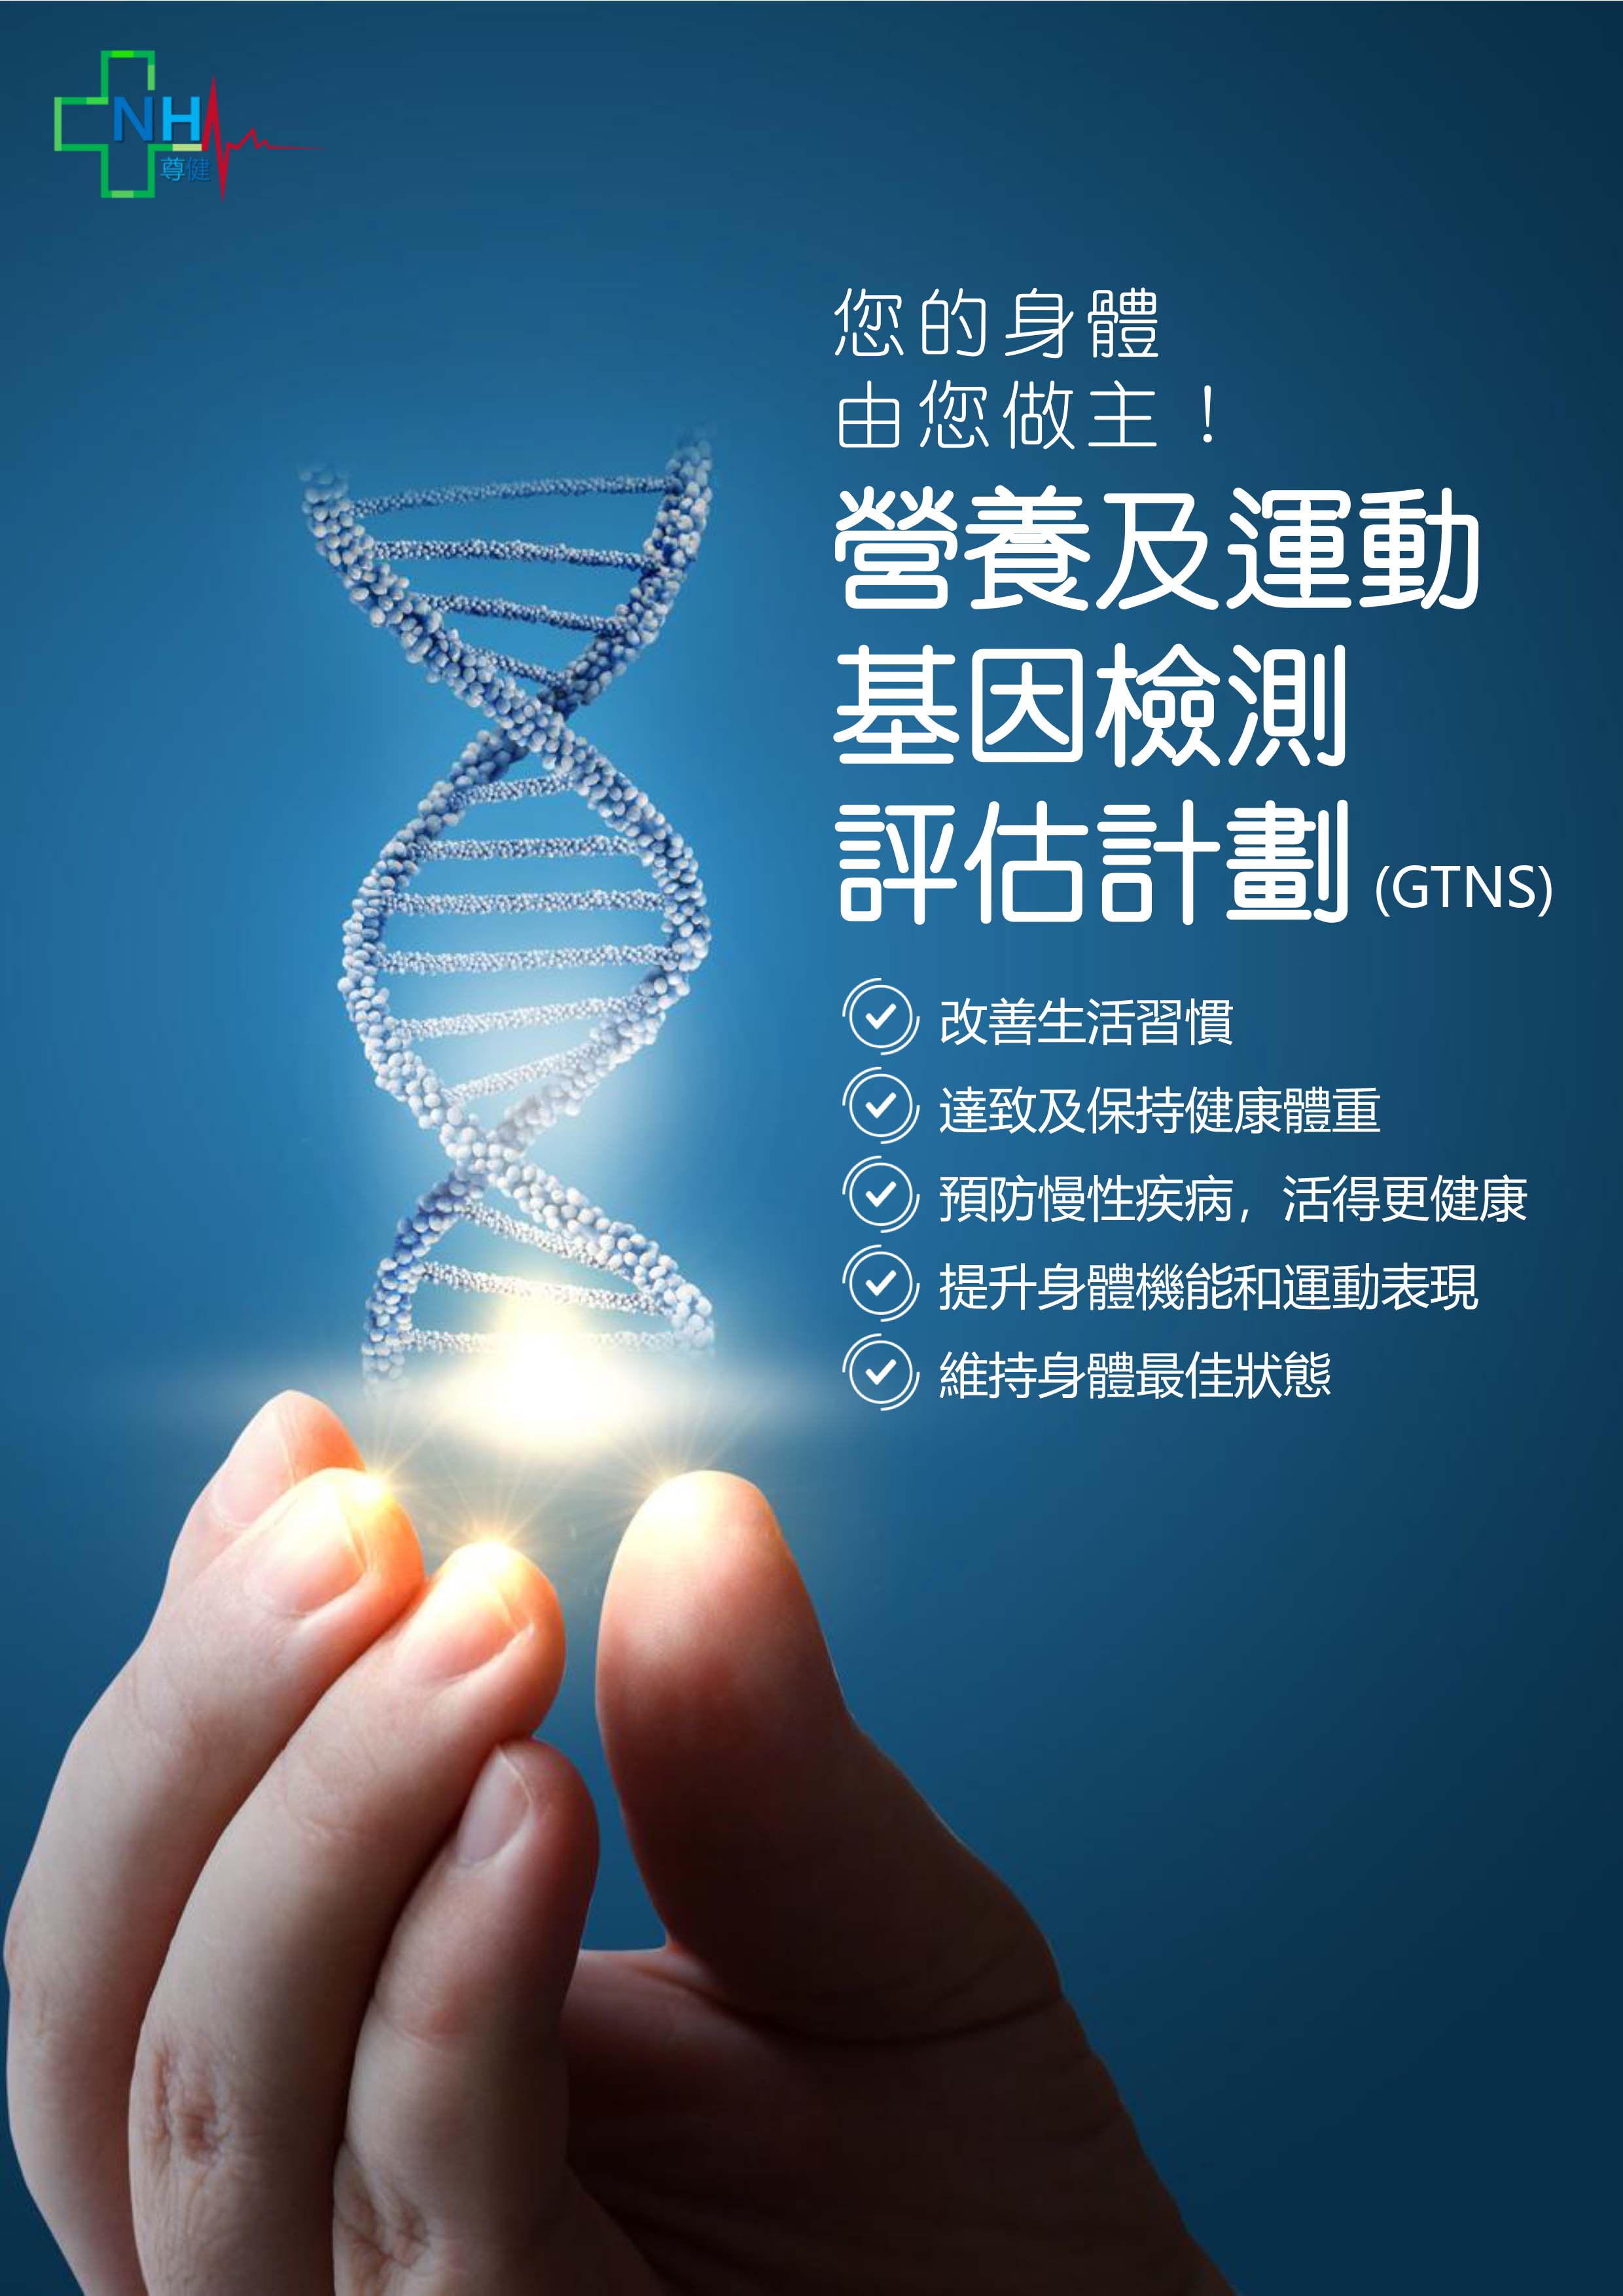 nutrition-and-sport-dna-test-1.jpg